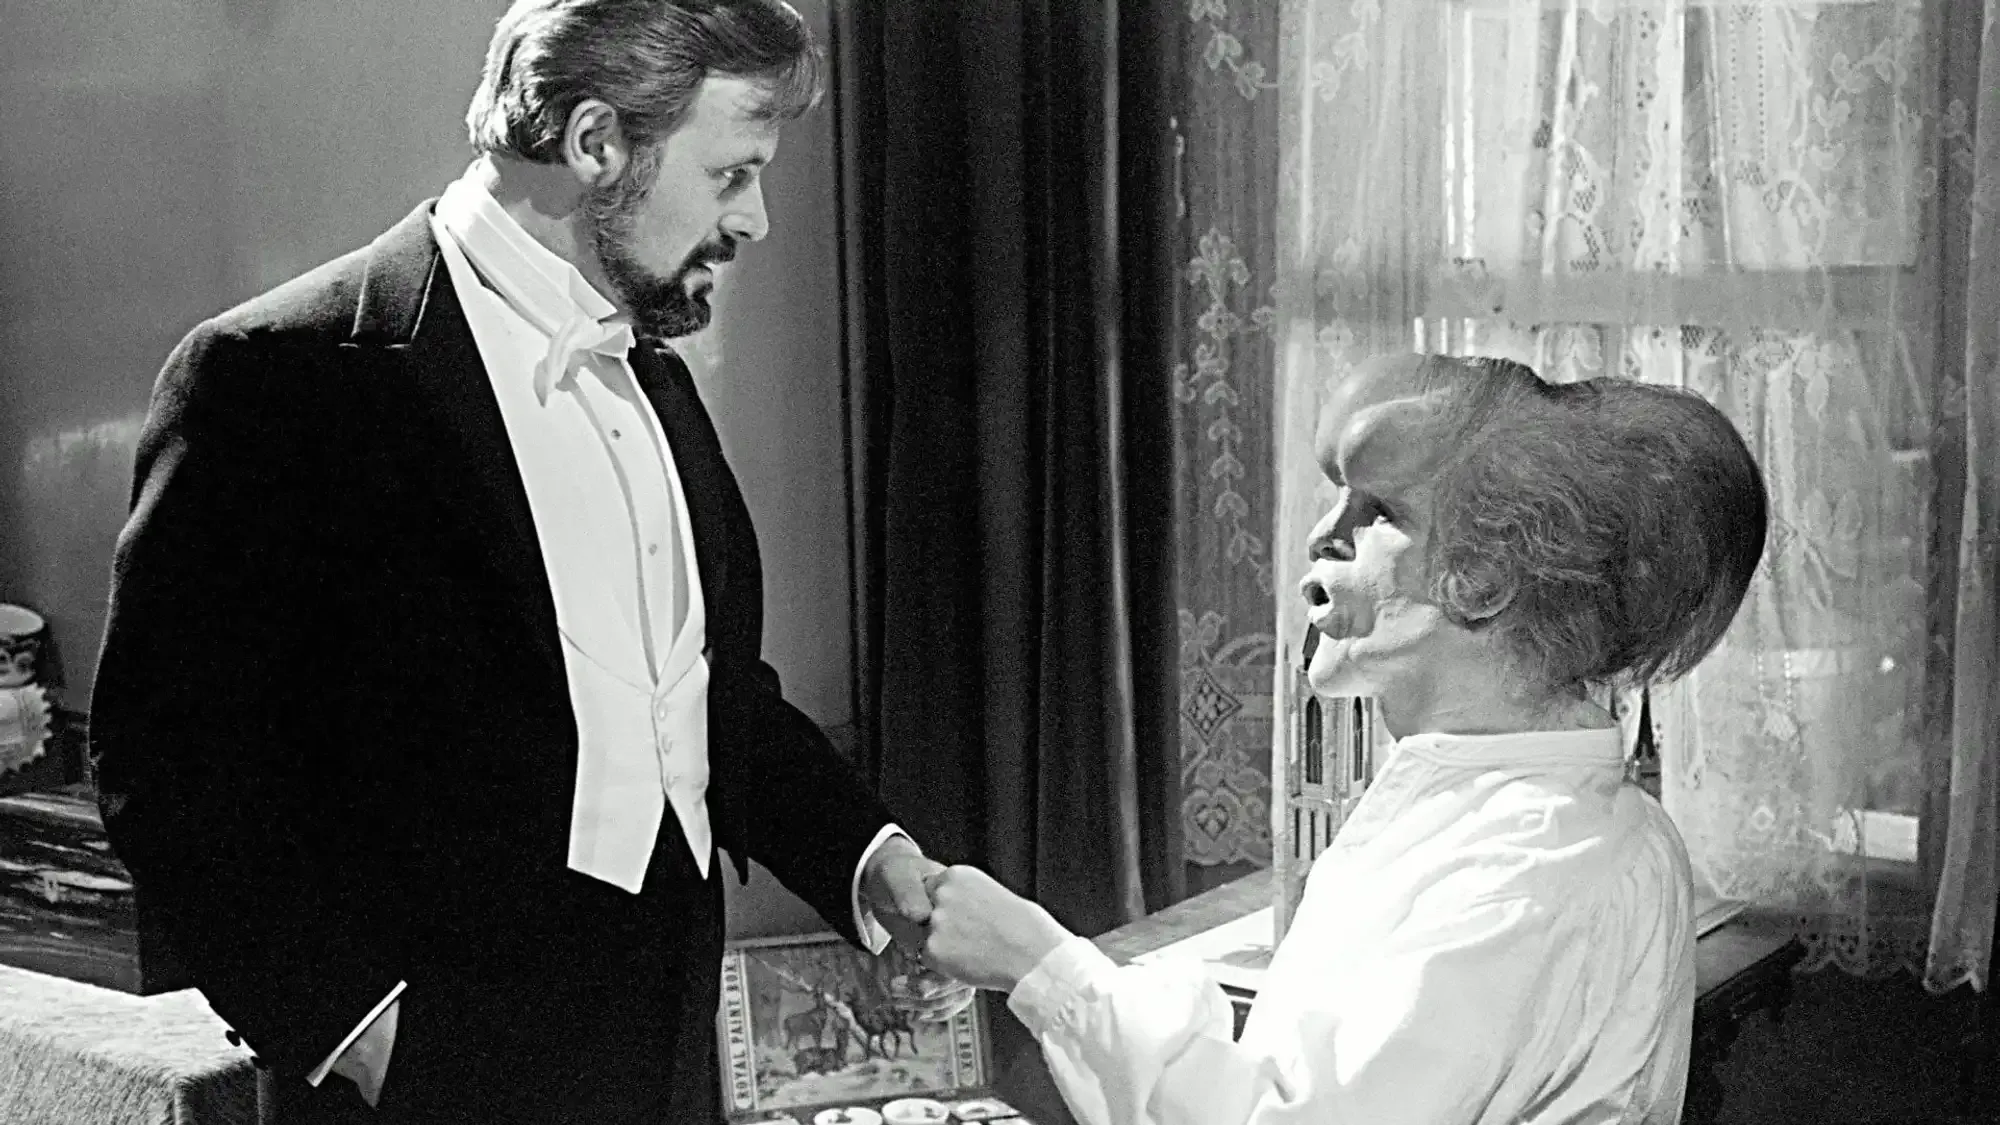 The Elephant Man movie review